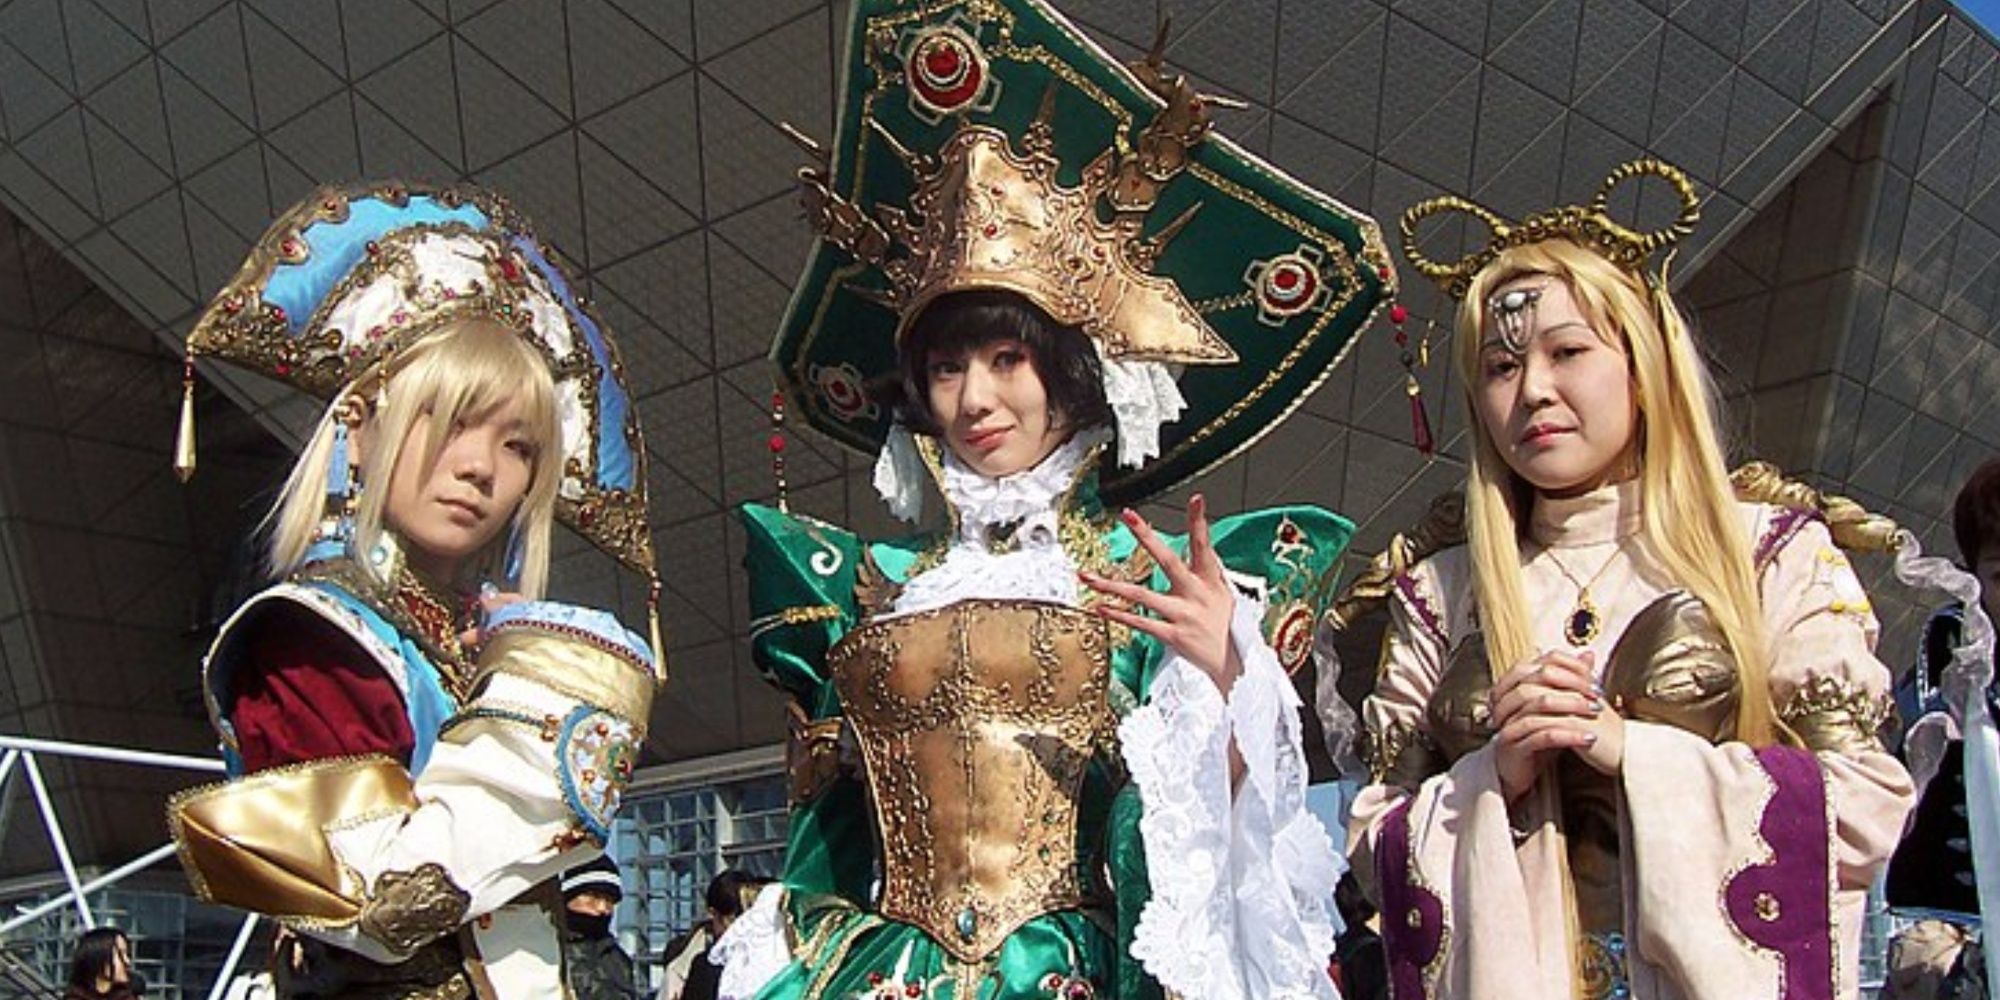 The_Cosplayers_of_Comiket_stormstill, via Wikimedia Commons Dec 2005